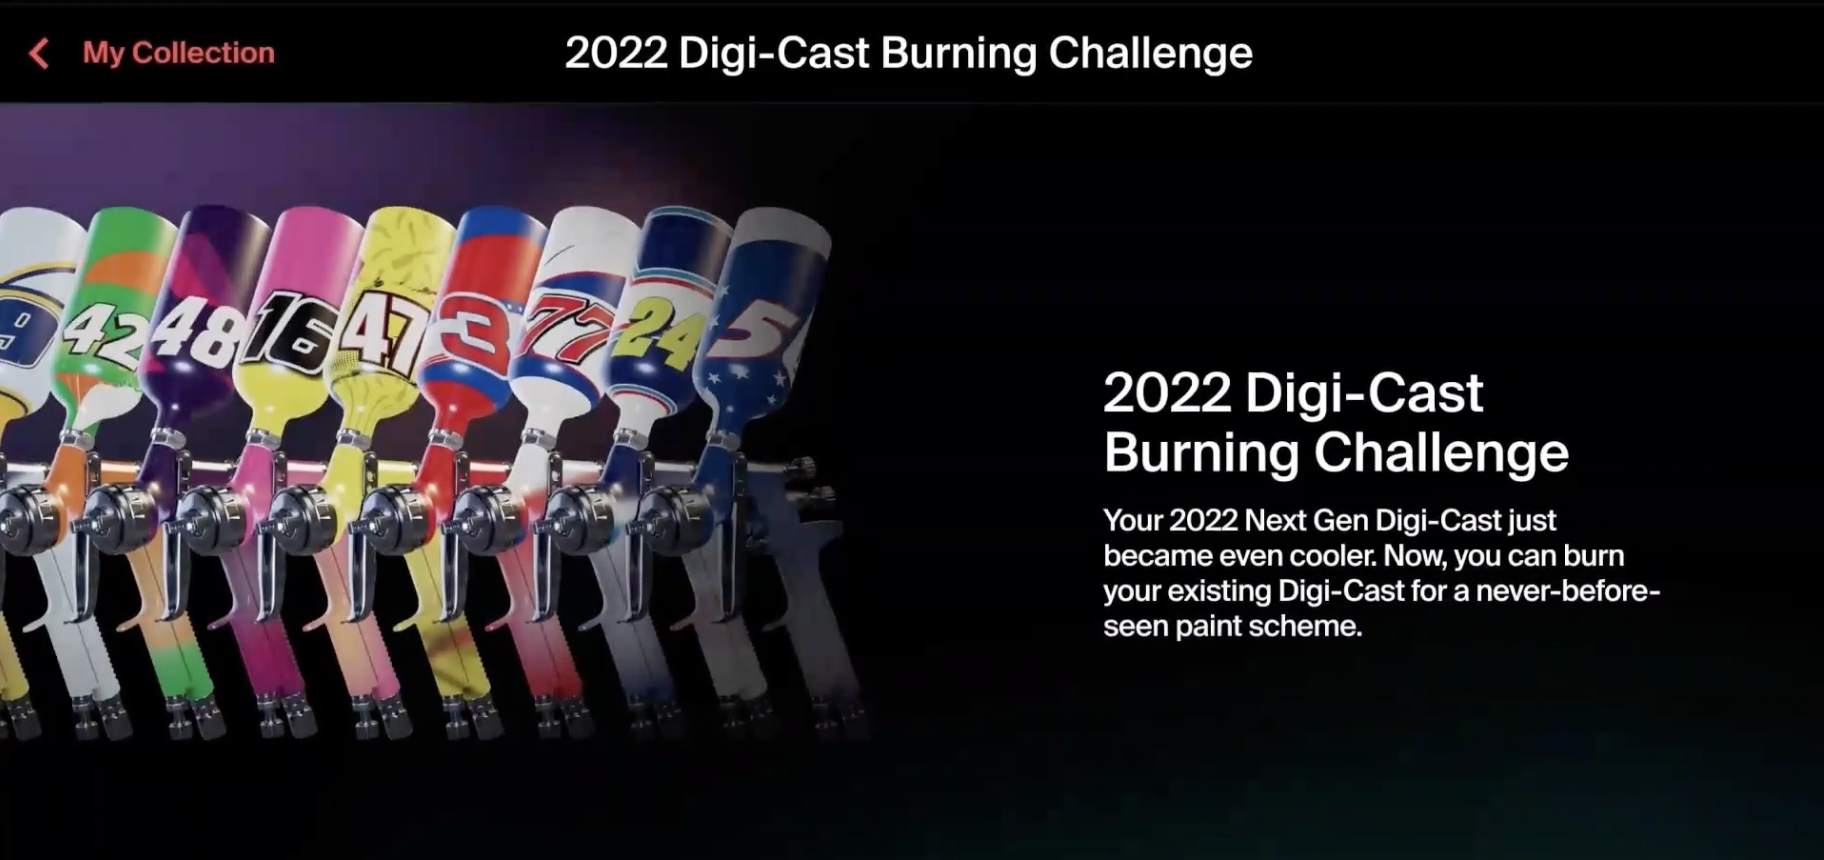 Digi-Casts Burning is Here!